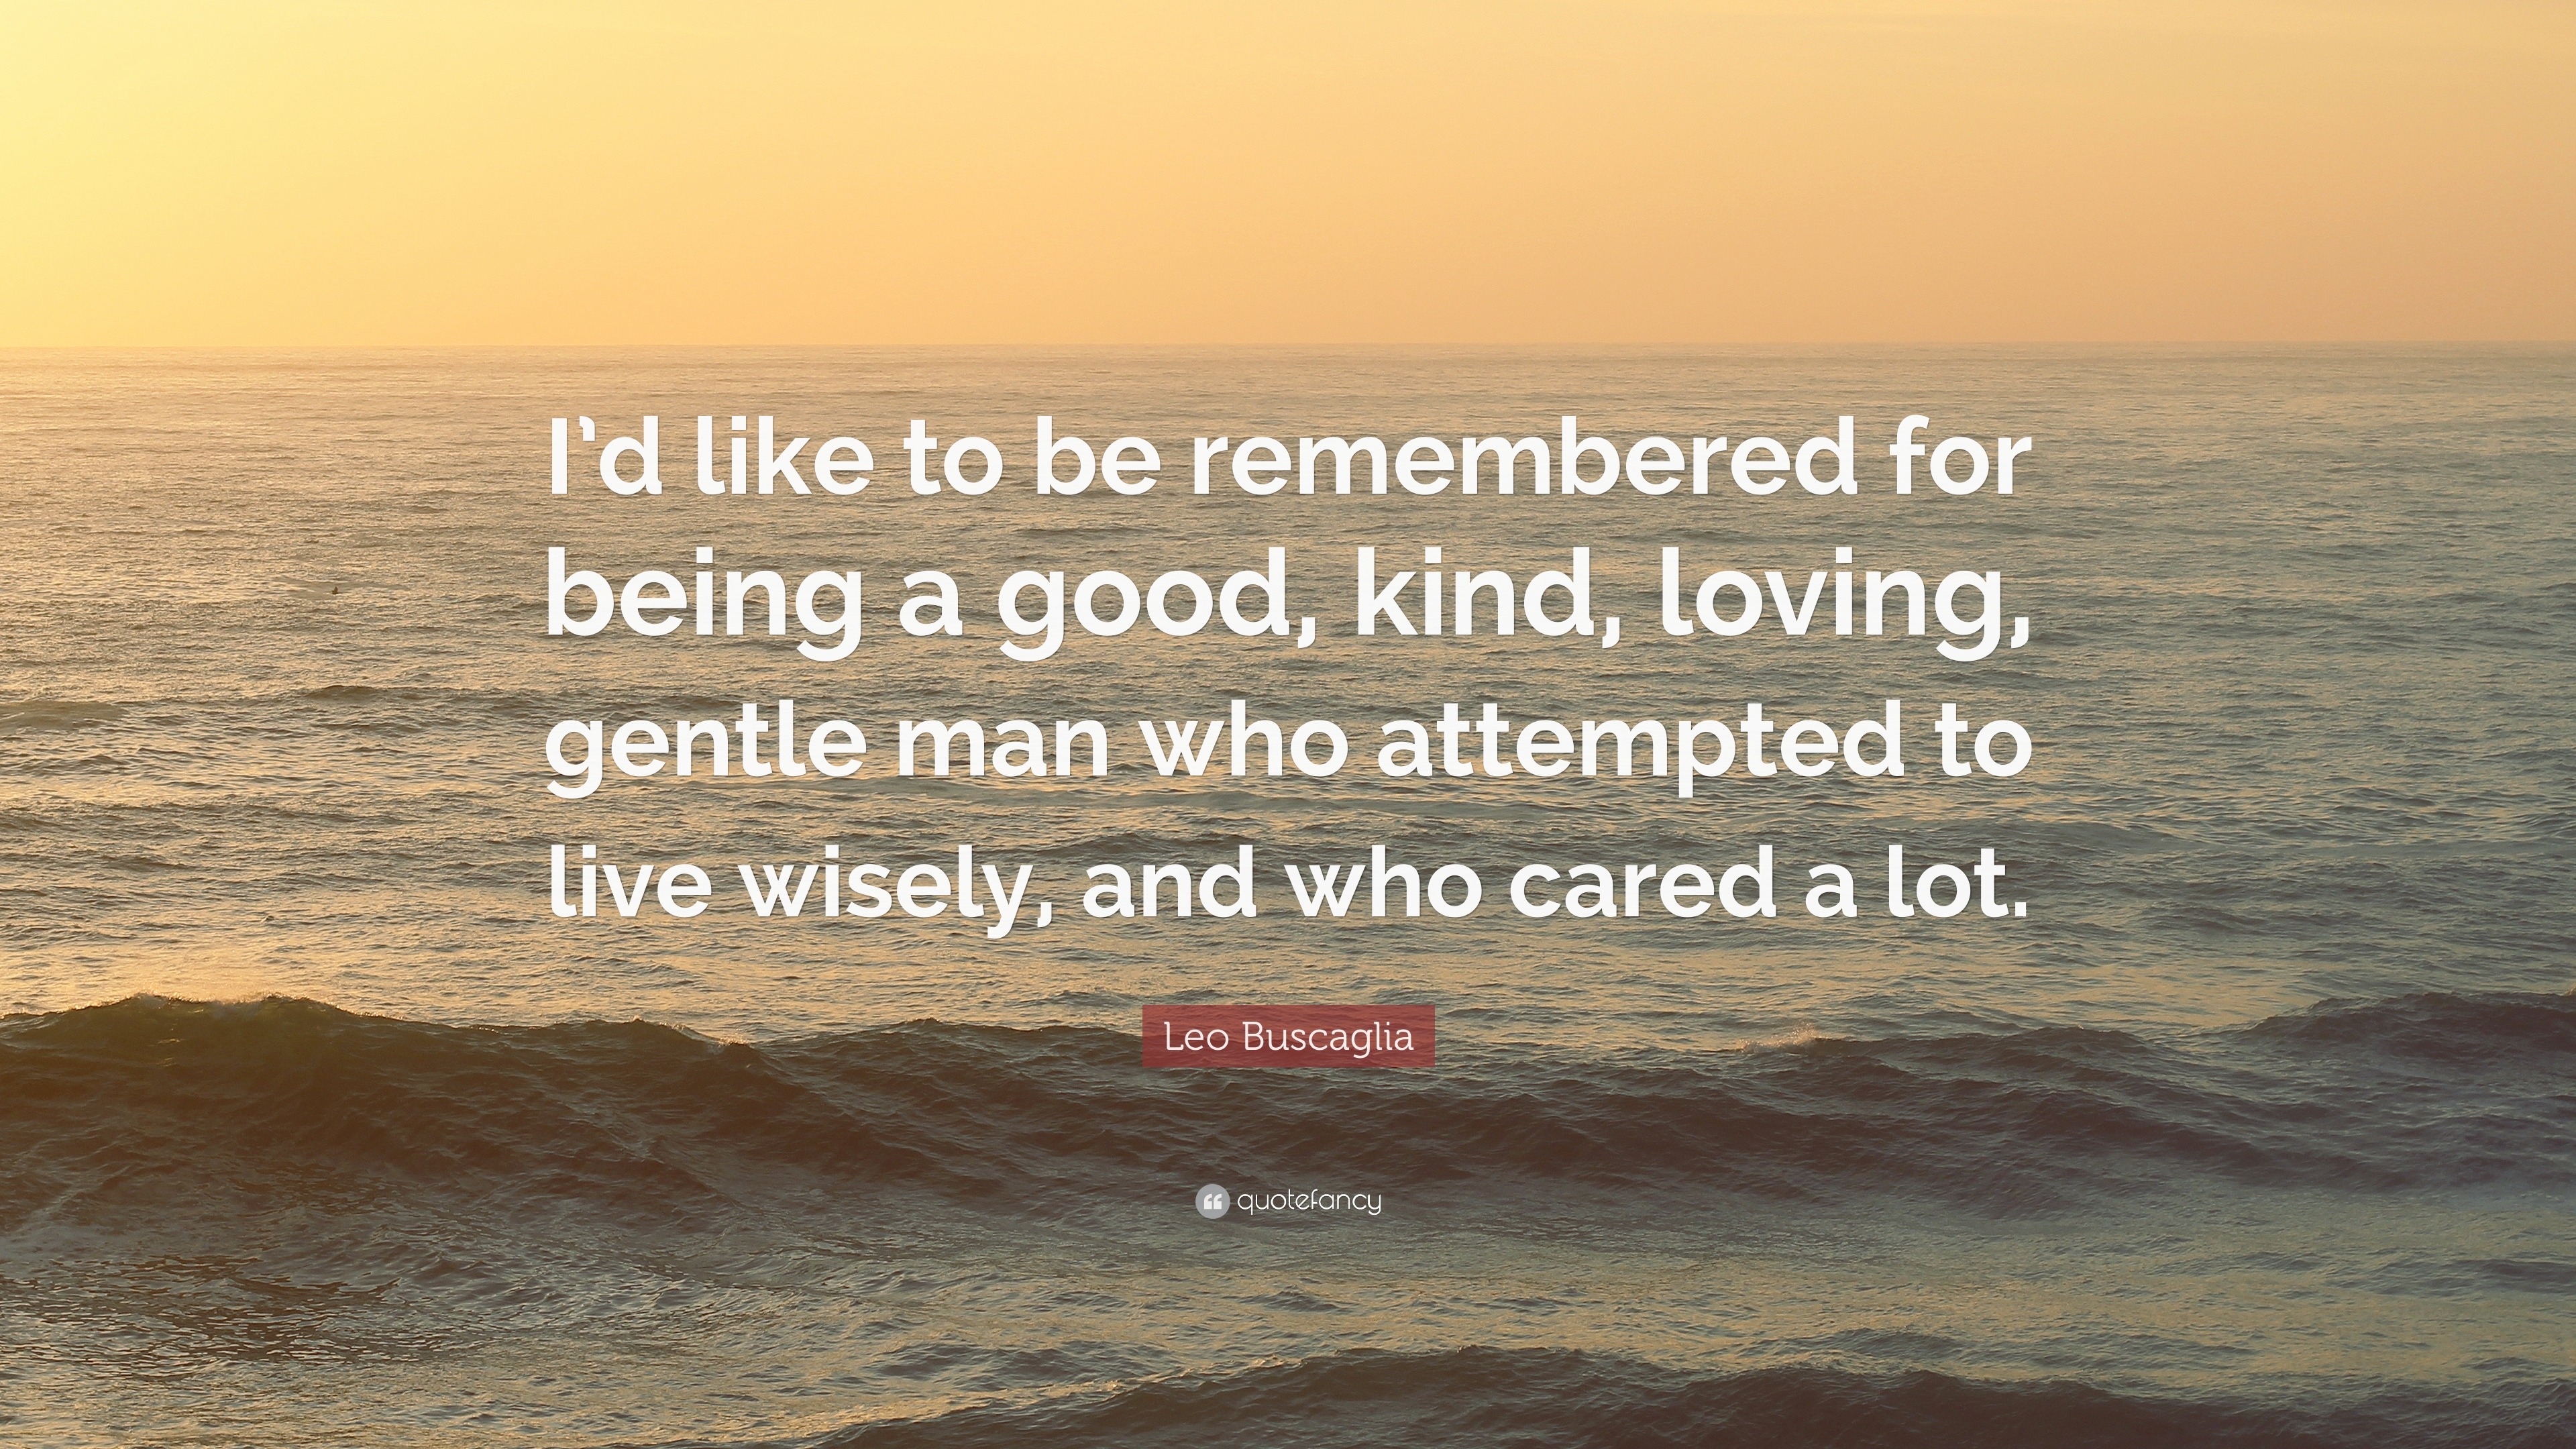 Leo Buscaglia Quote “I d like to be remembered for being a good